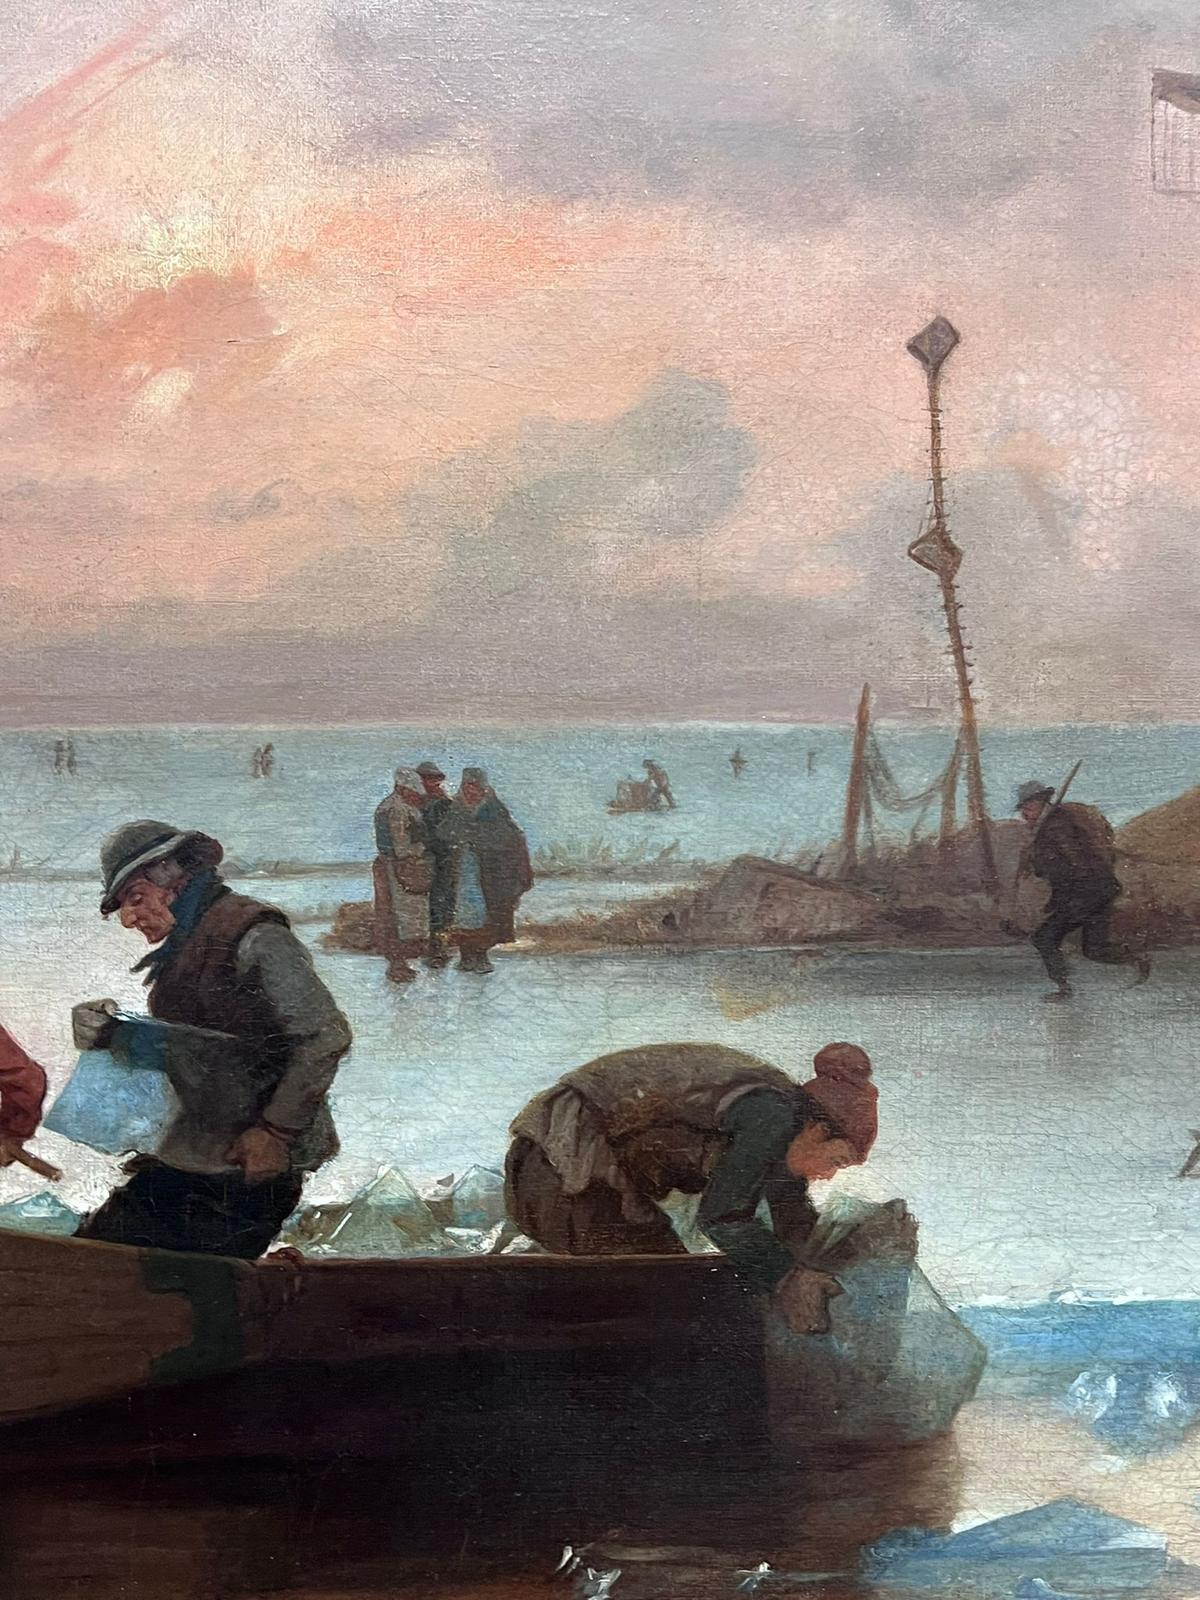 Cutting the Ice
Dutch School, circa 1880's
signed with initials AW and dated 1888
oil on canvas, unframed
canvas: 32.5 x 56 inches
provenance: private collection, England
condition: overall good and sound condition 